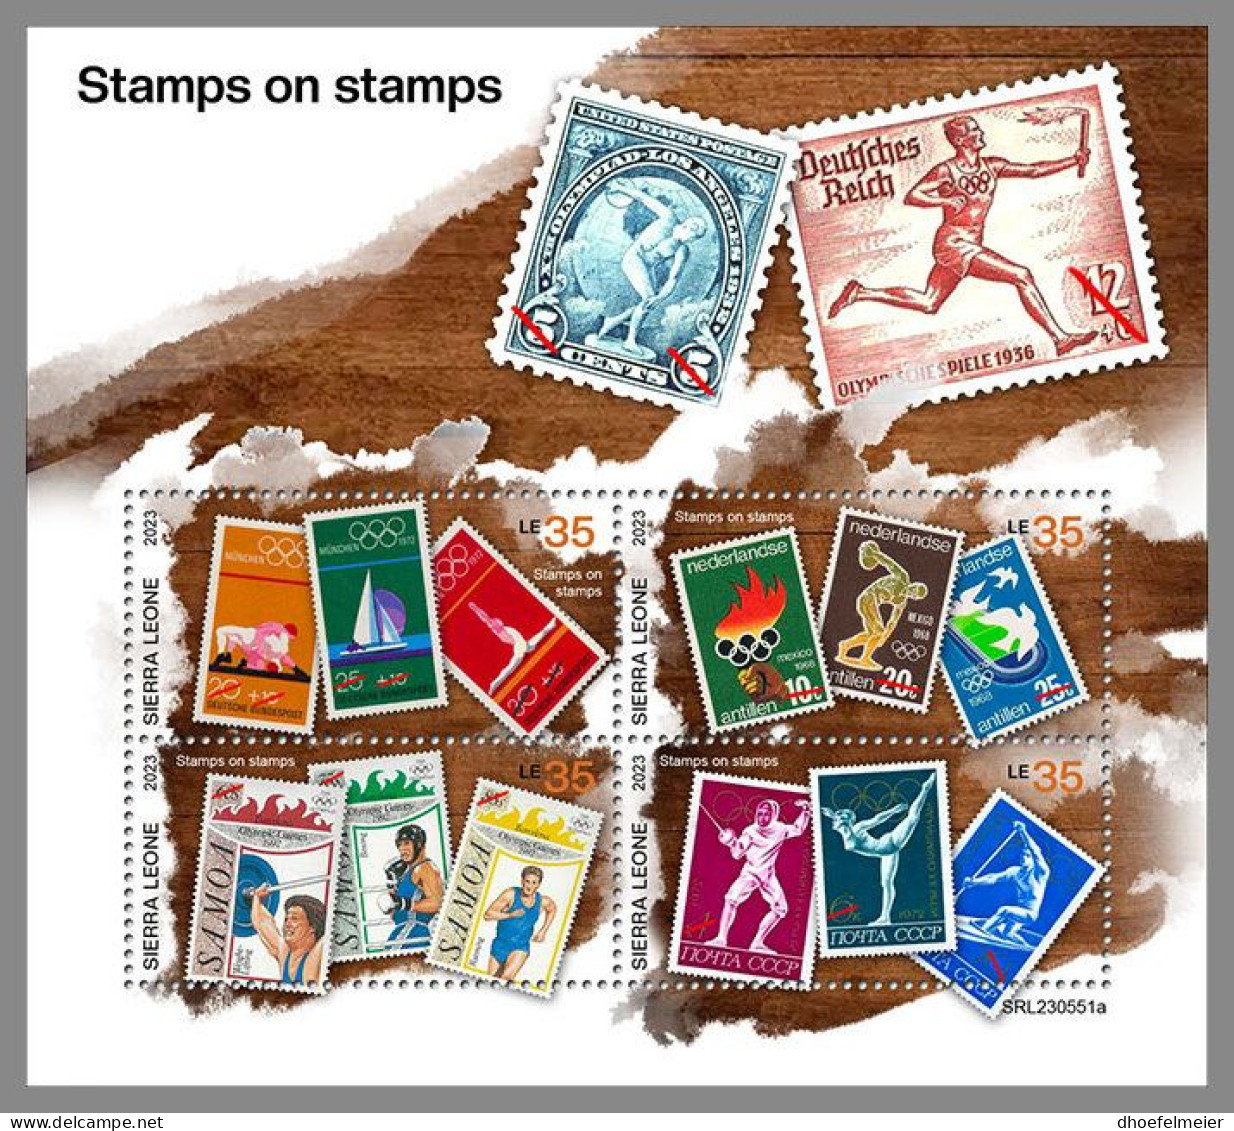 SIERRA LEONE 2023 MNH Stamps On Stamps Olympic Games M/S – OFFICIAL ISSUE – DHQ2409 - Francobolli Su Francobolli